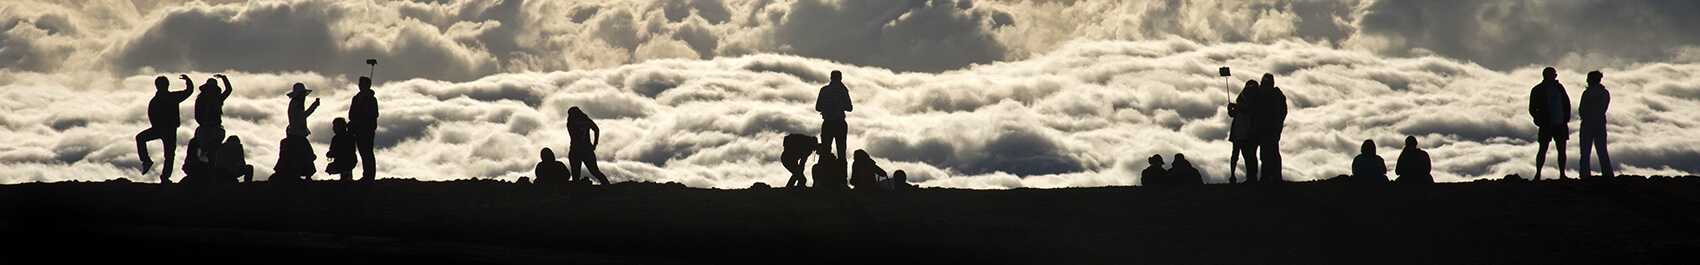 Silhouettes on mountain top against clouds